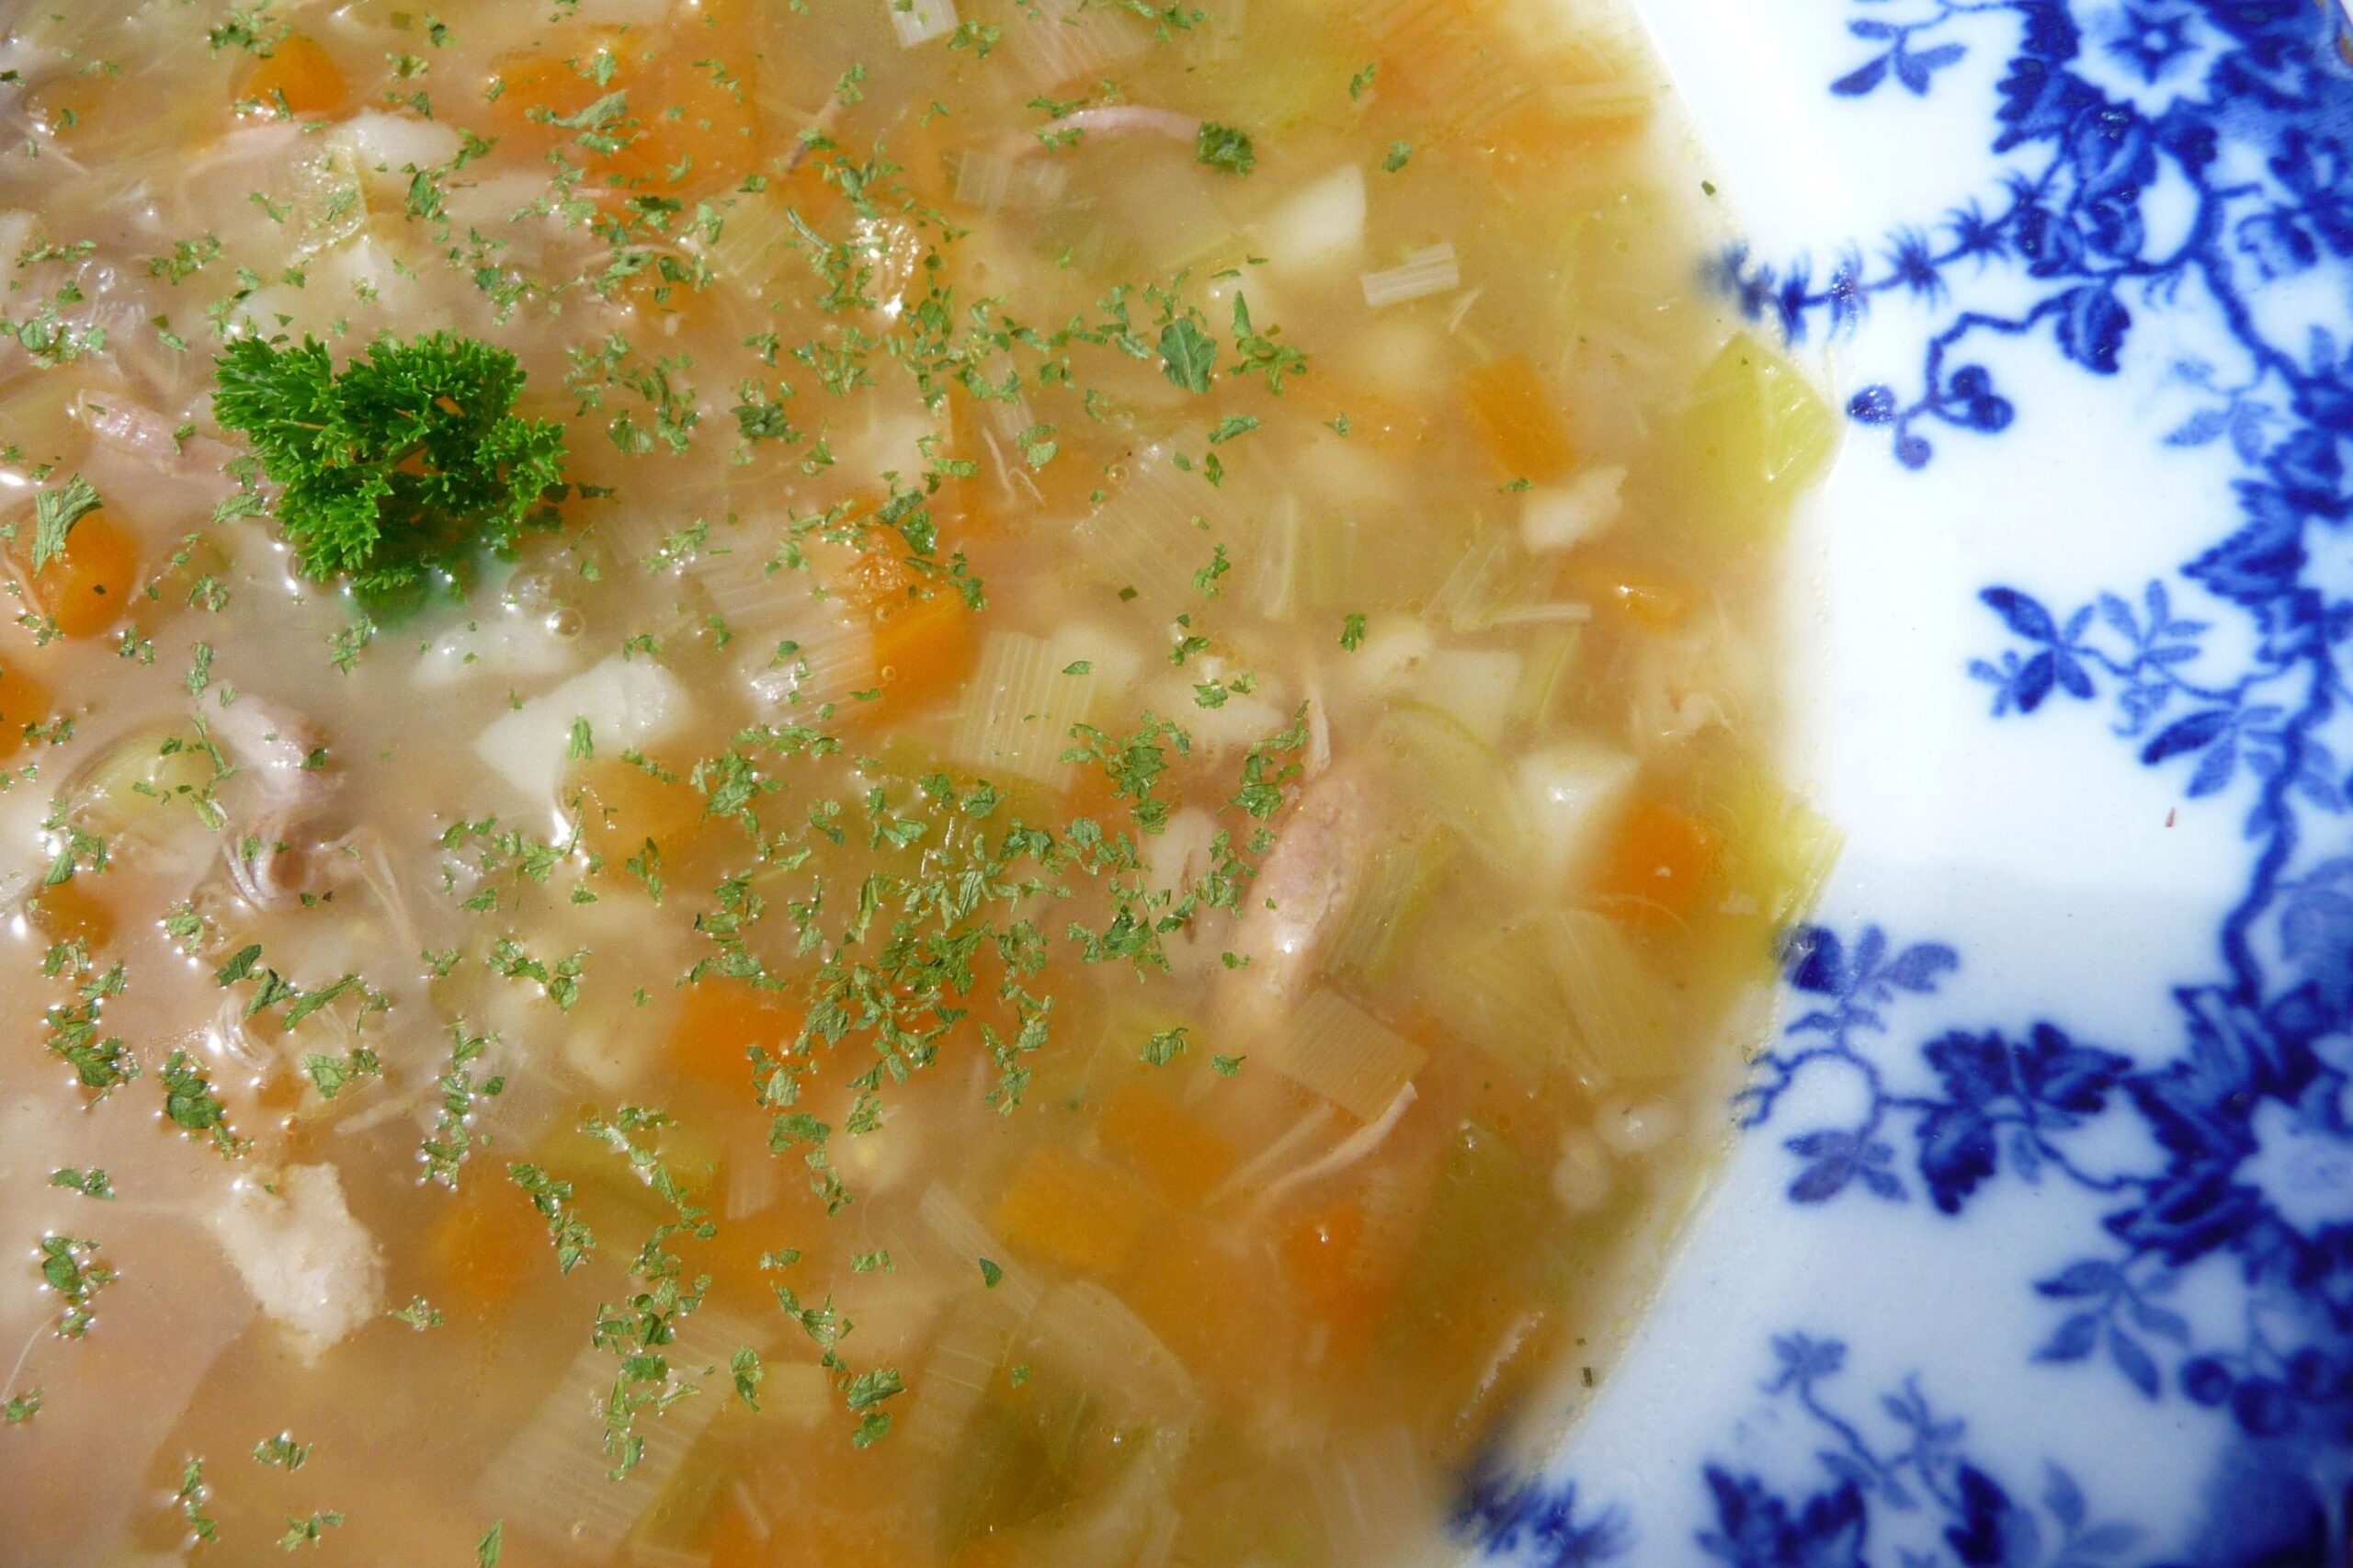 Hearty and Healthy: Try Our Scotch Broth Recipe